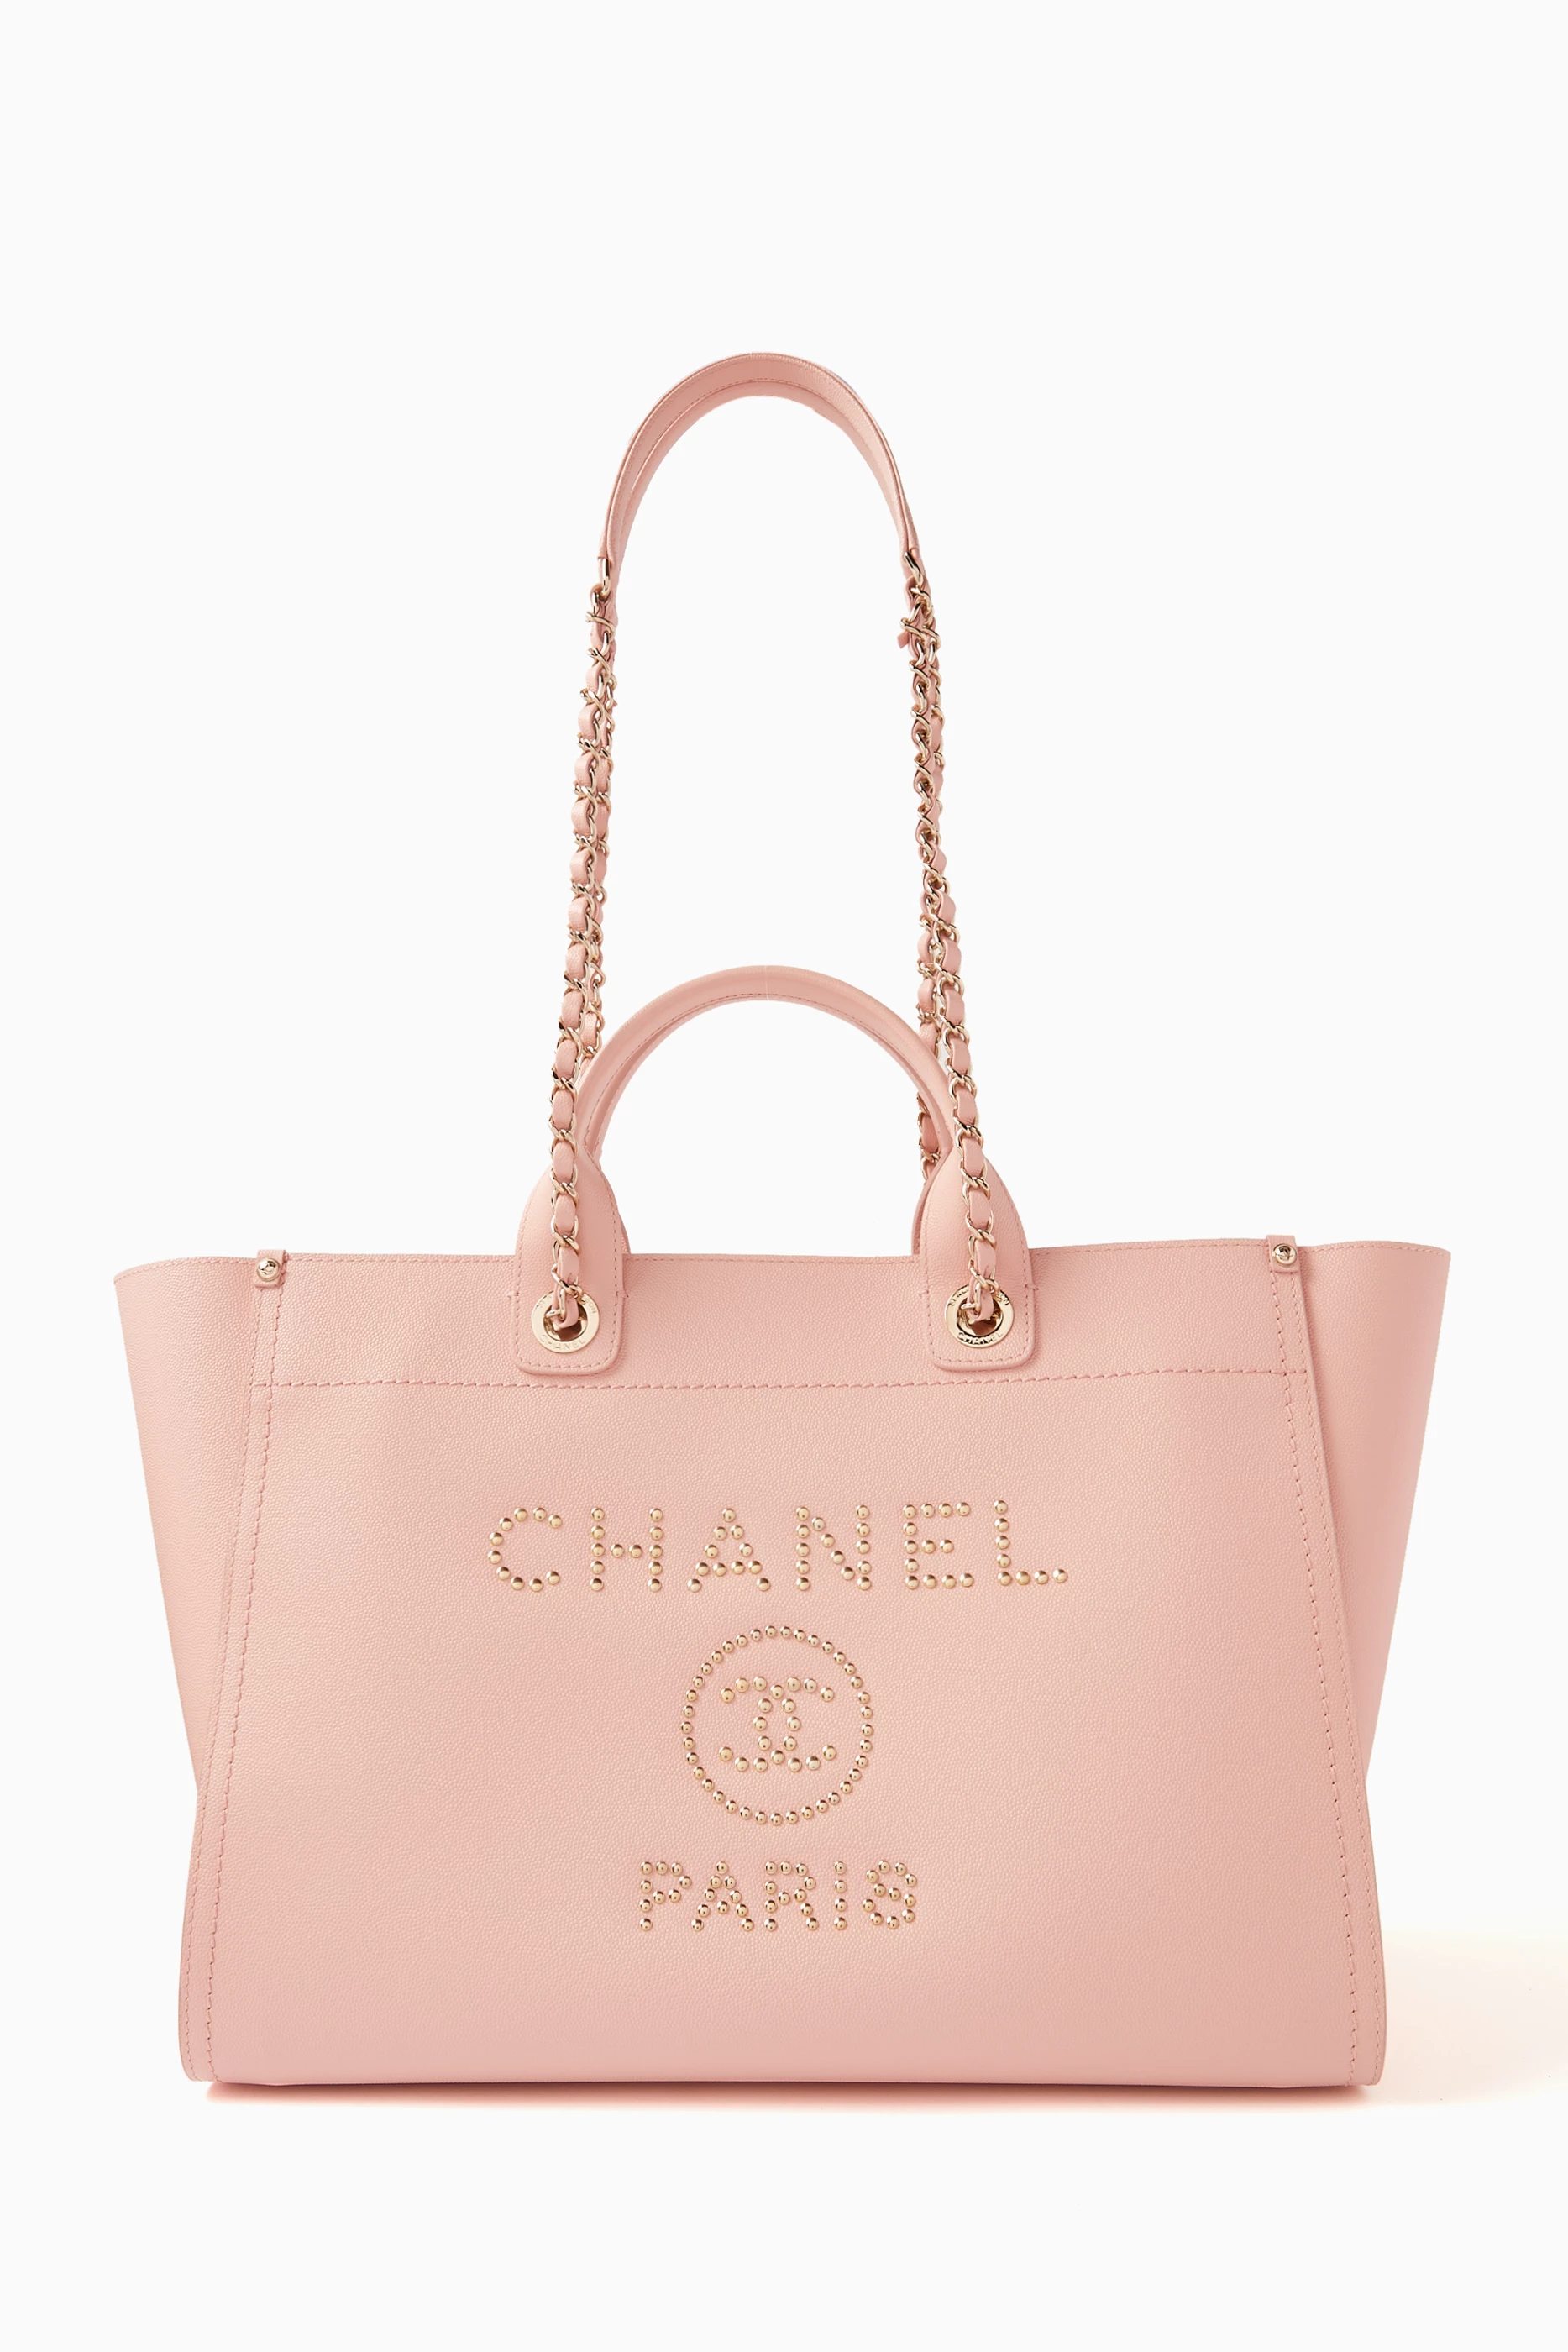 Pink Chanel Bags, Luxury Resale